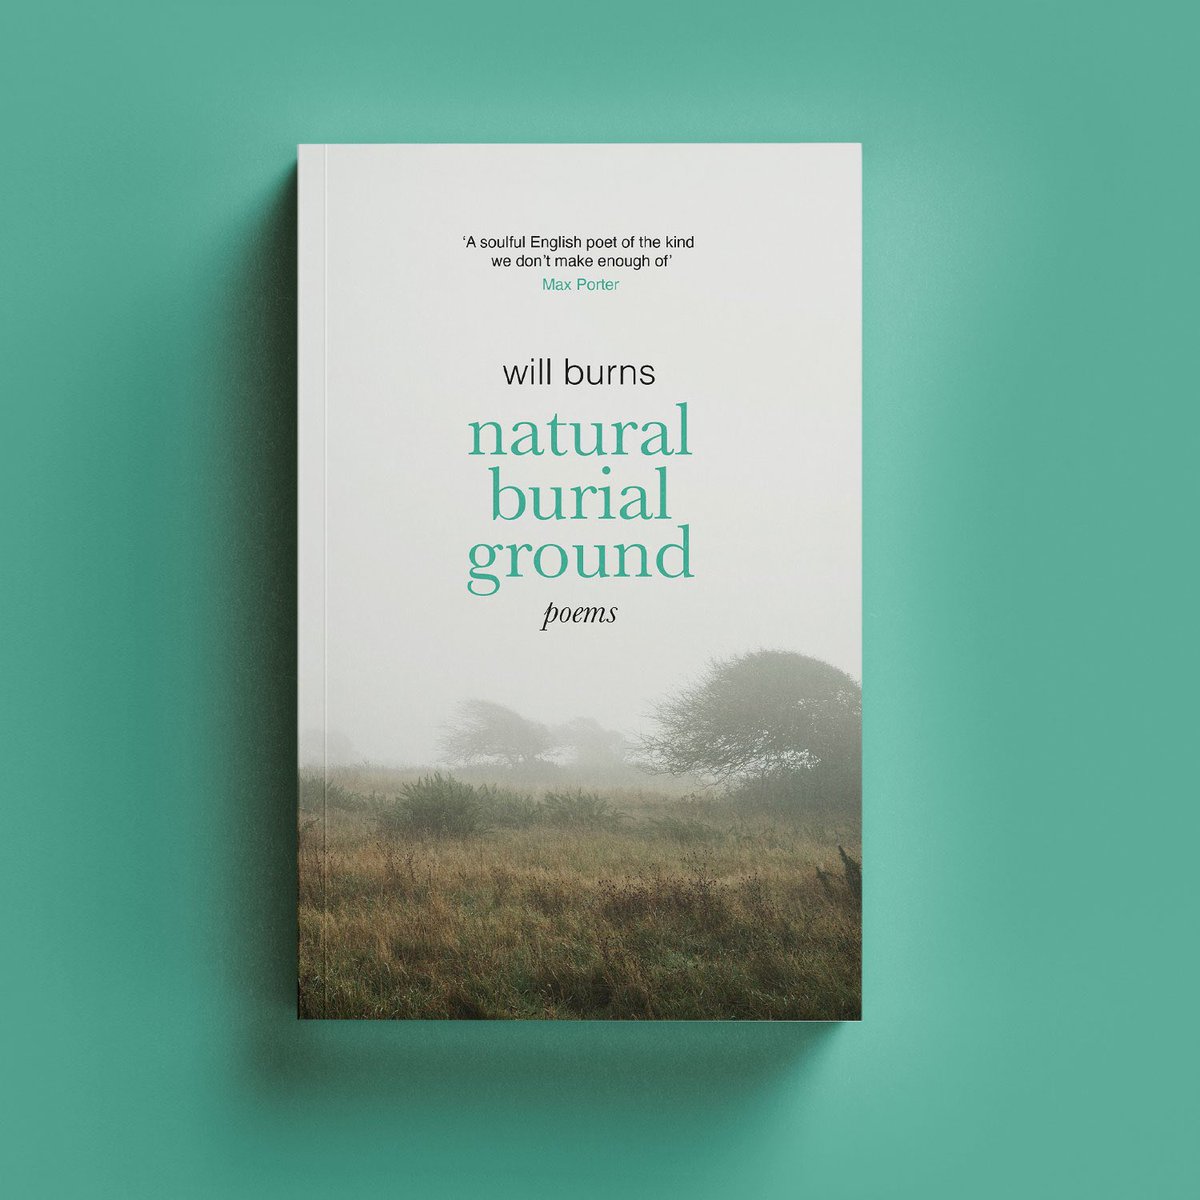 On the road to @realmagicbooks in Wendover for the launch of @TroubledStriker's Natural Burial Ground from @CorsairBooks. I'm reading as the warm-up act, and will keep it brief to avoid being bottled off by the Burns fans.